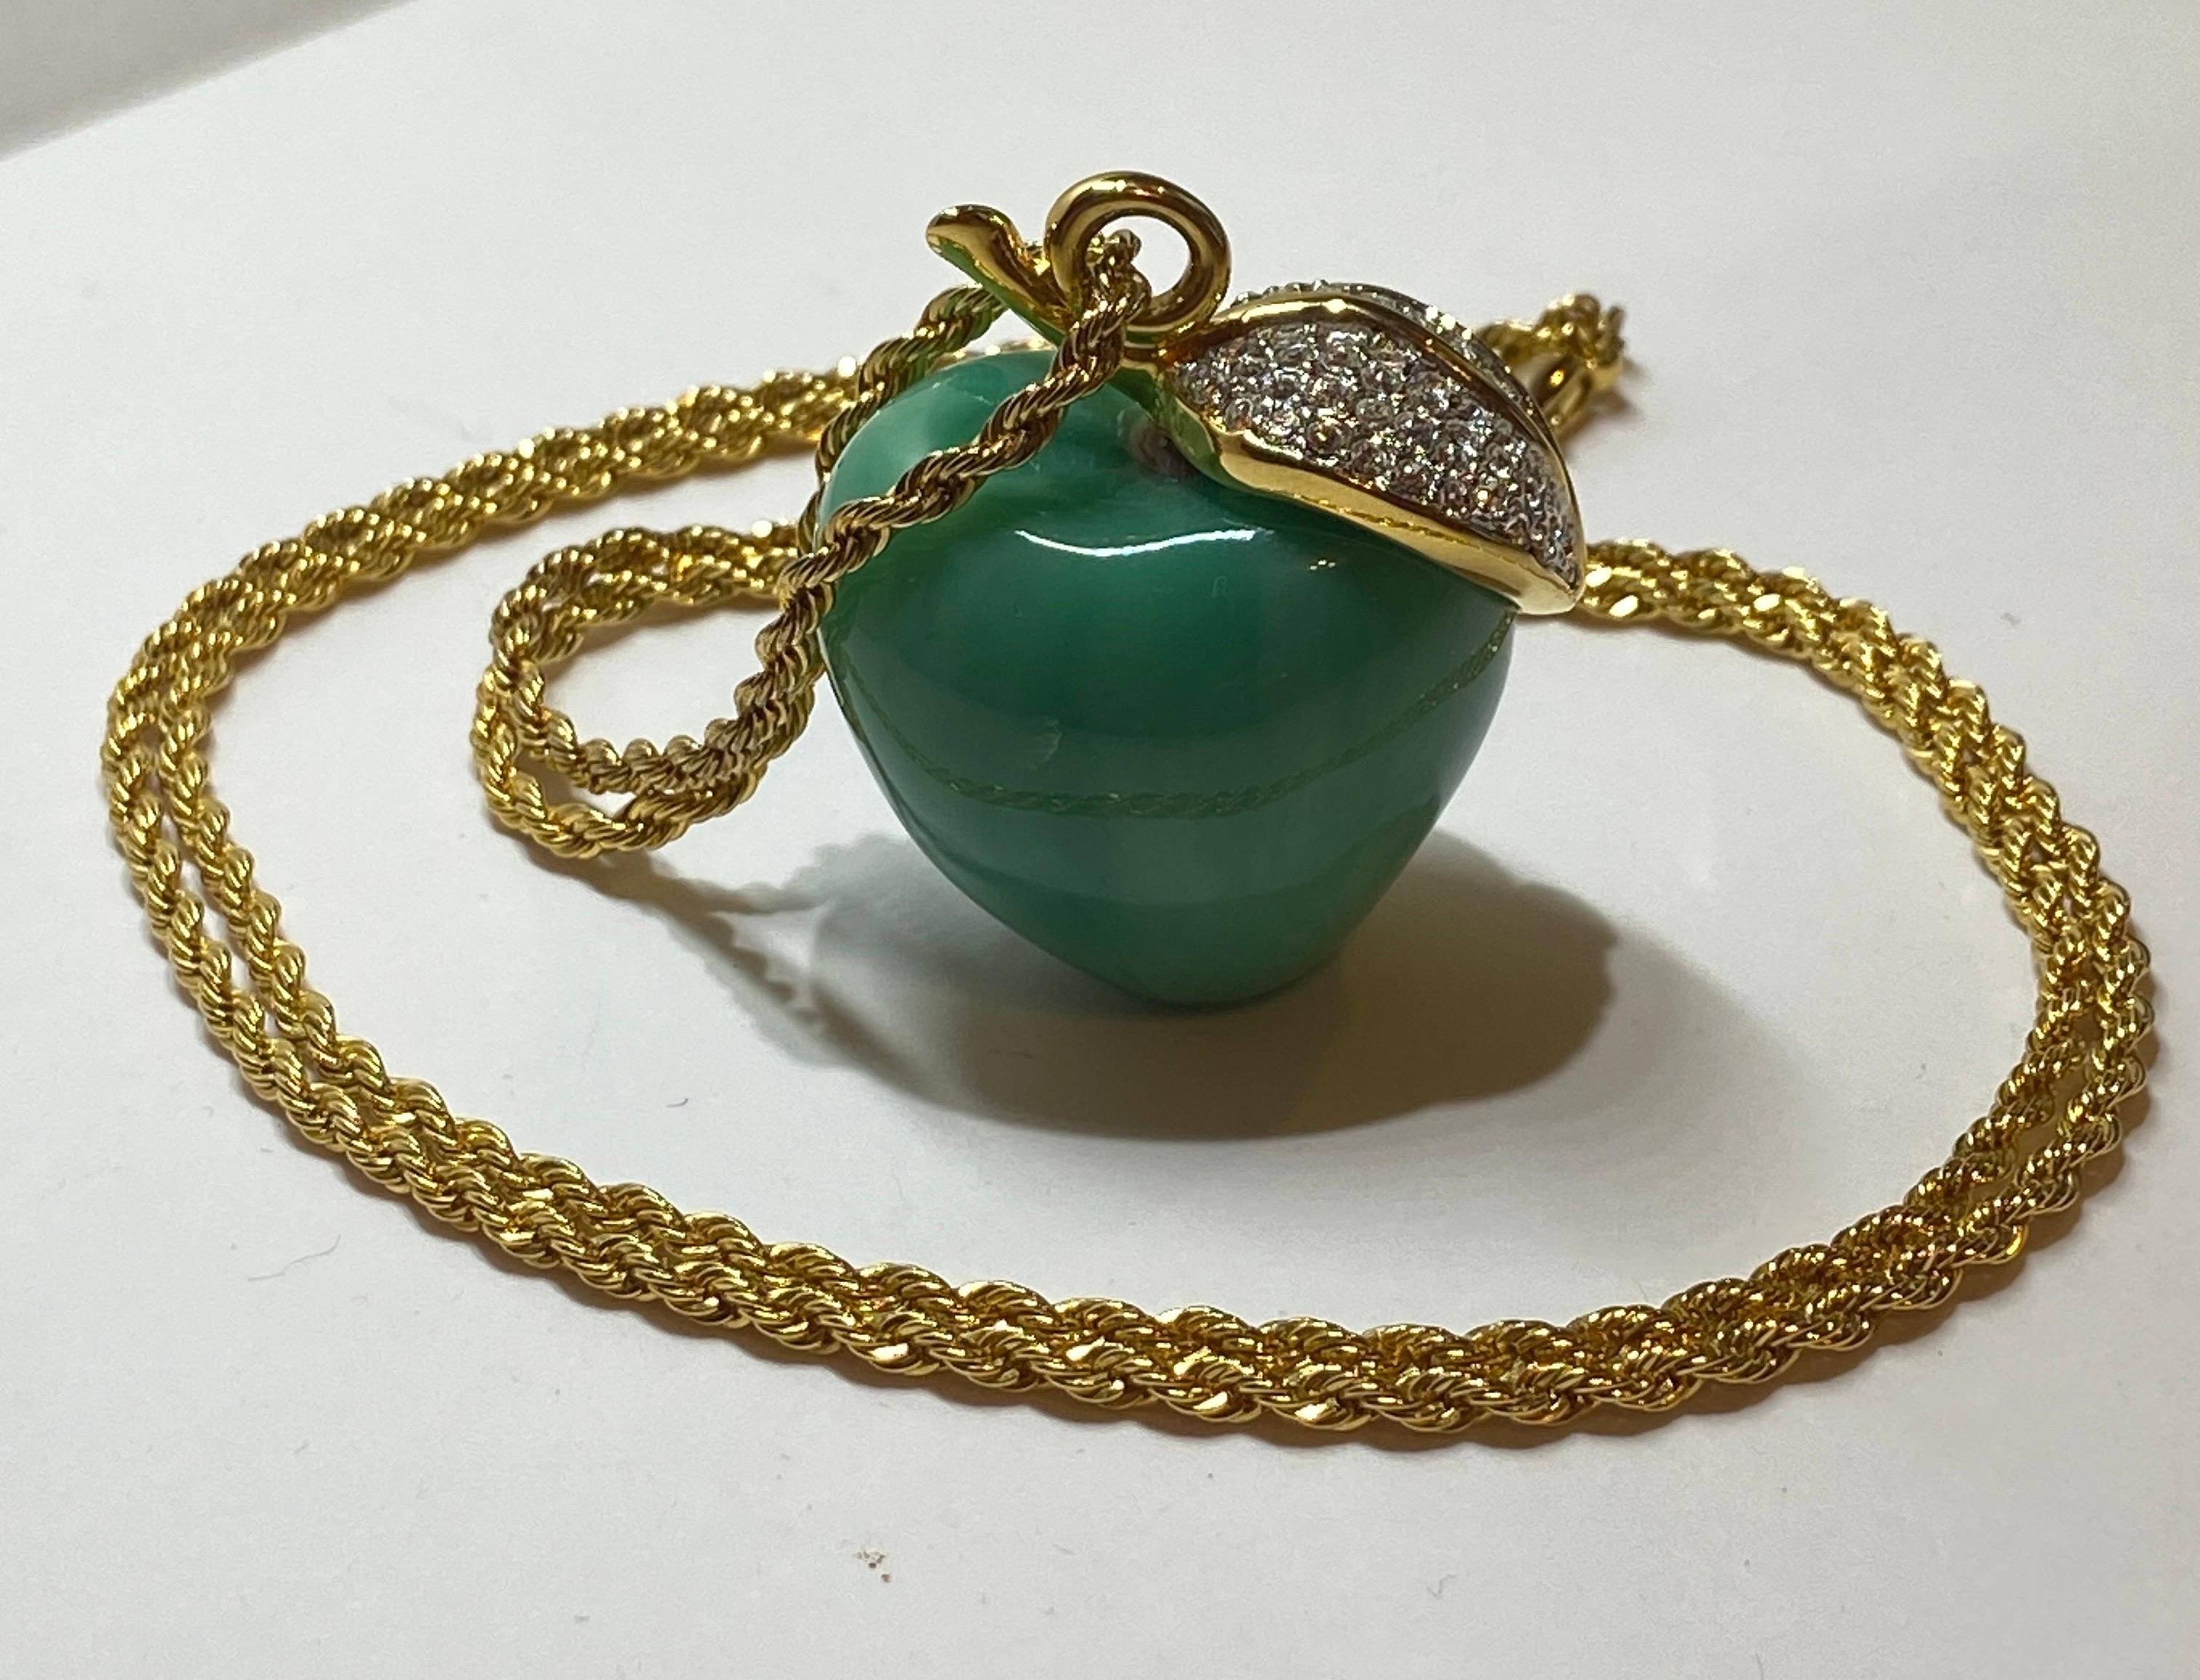 Kenneth Jay Lane's wonderfully whimsical large jade-green lucite apple is studded with rhinestones throughout. Accented with gilded gold hardware surrounding the rhinestone leaf, the matching gilded gold hardware necklace is styled in a 